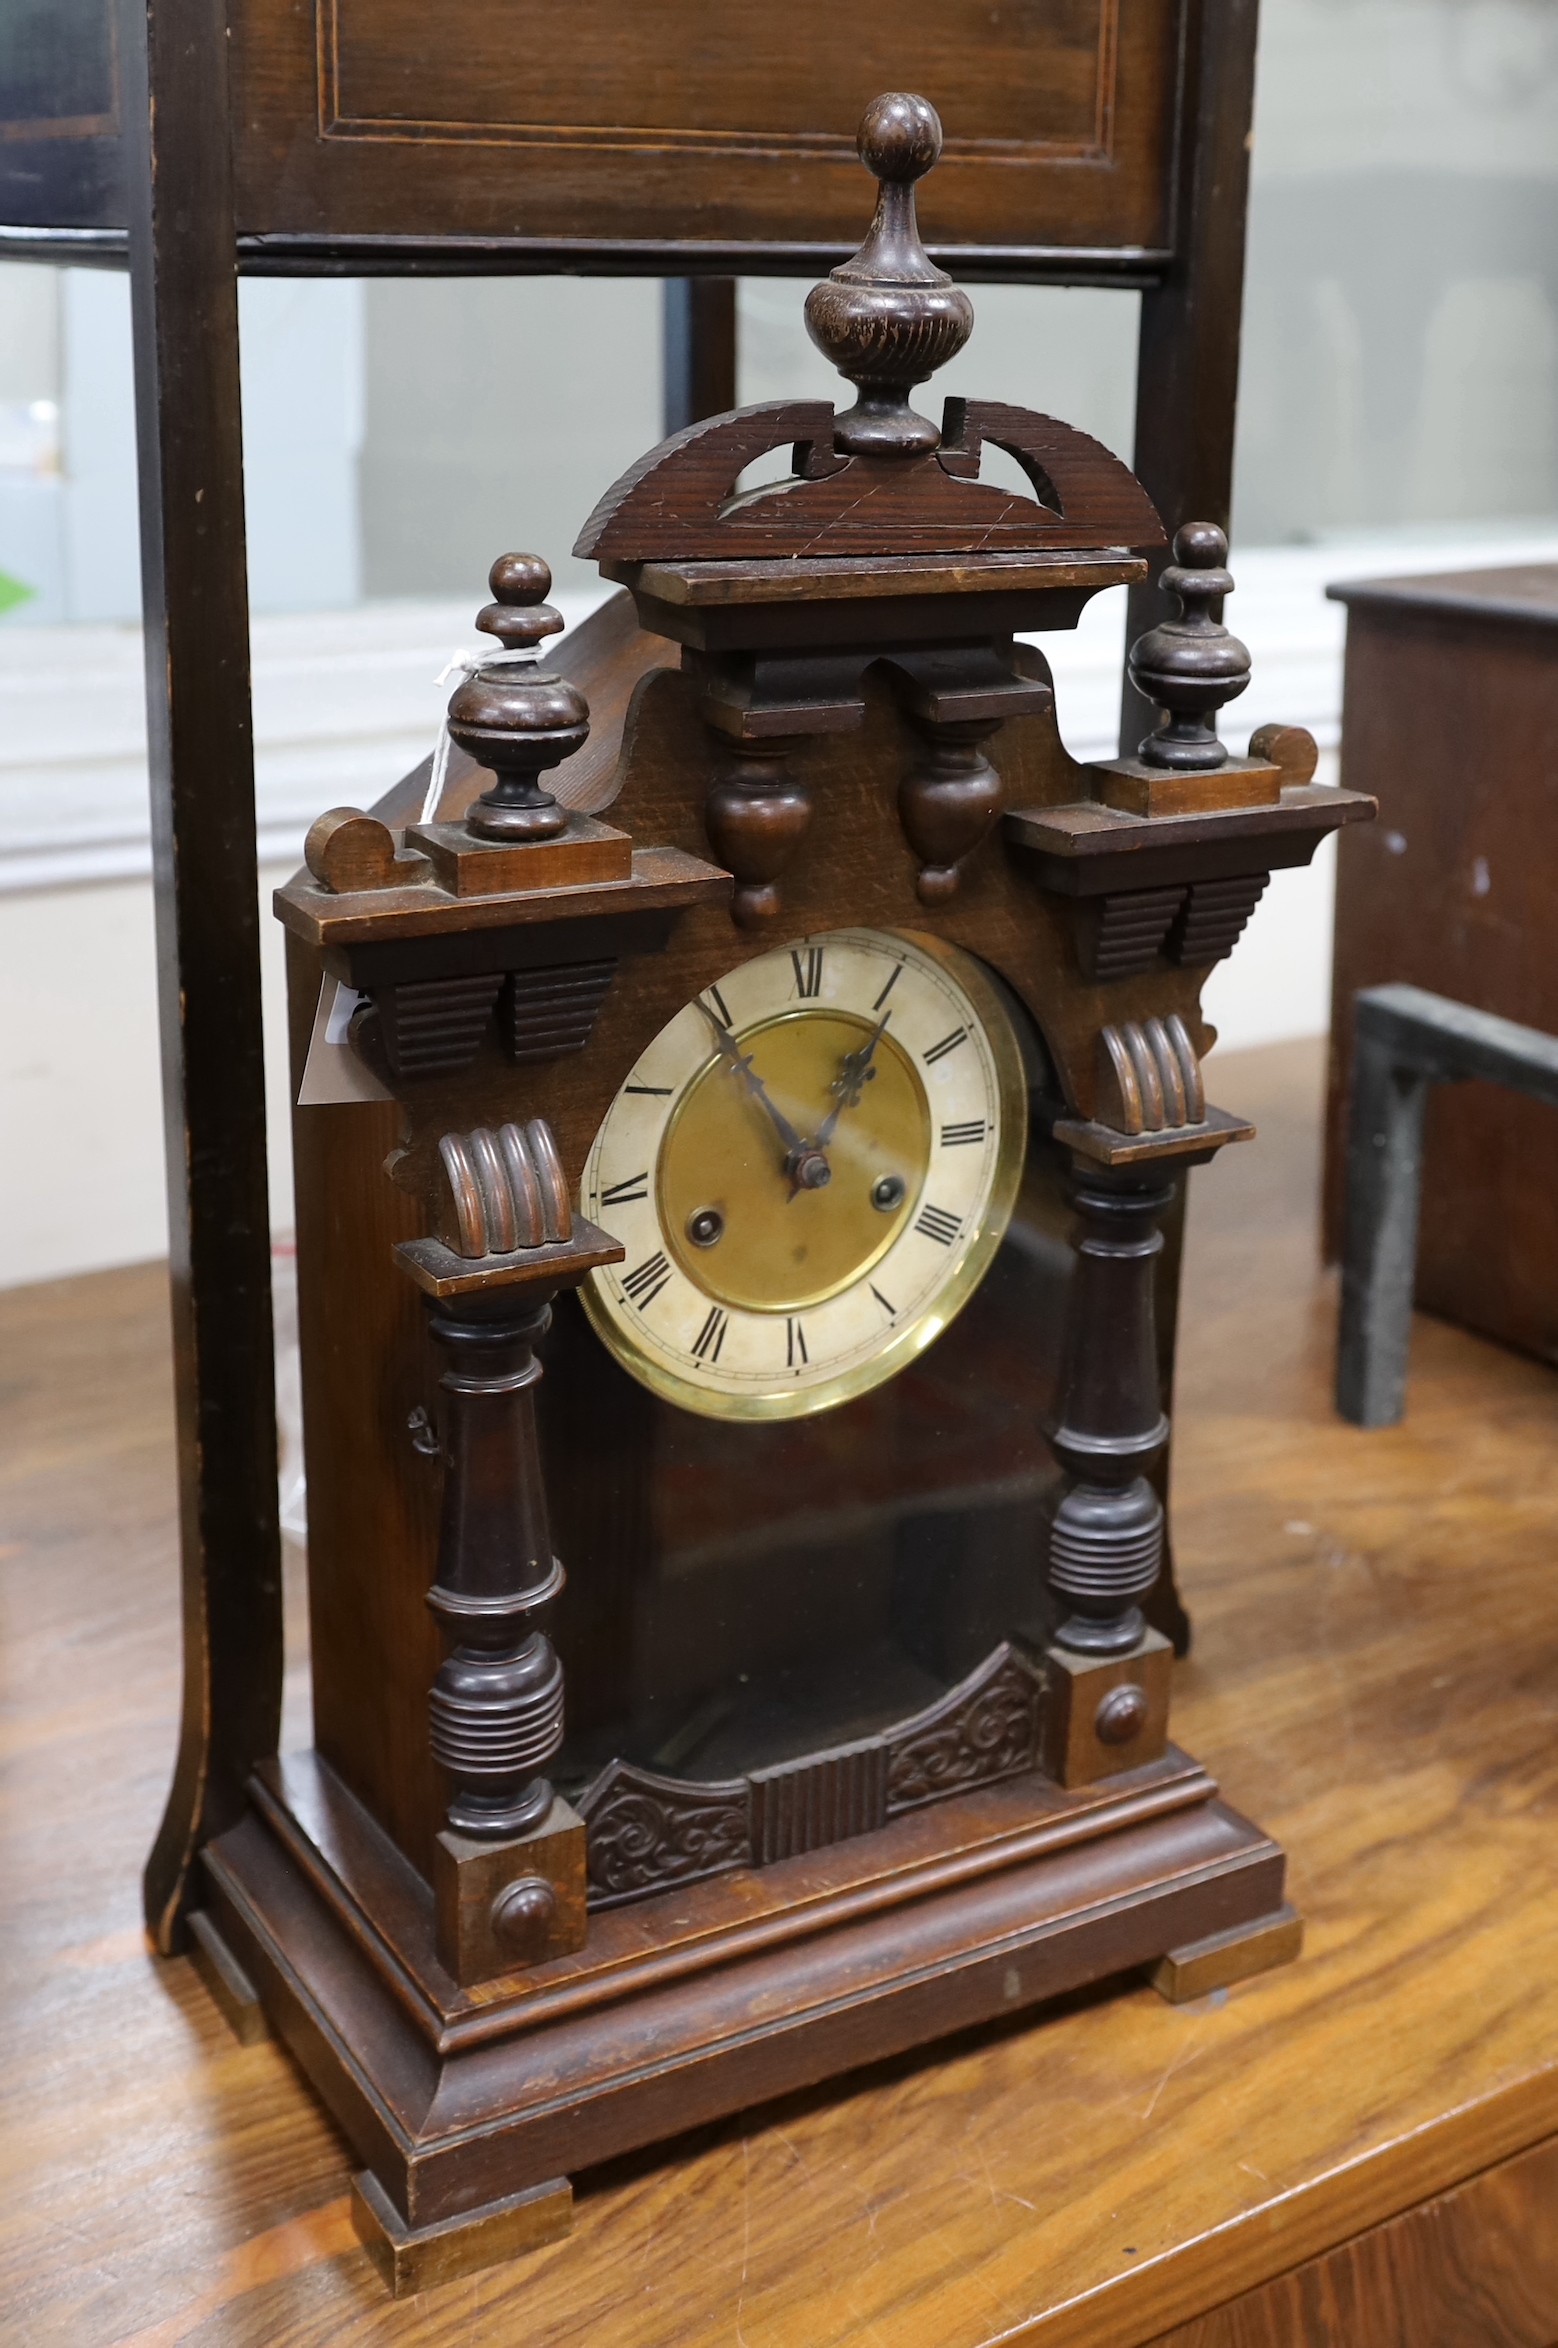 An inlaid mahogany work table, with spring loaded drawer, and a 19th century Black Forest mantel clock